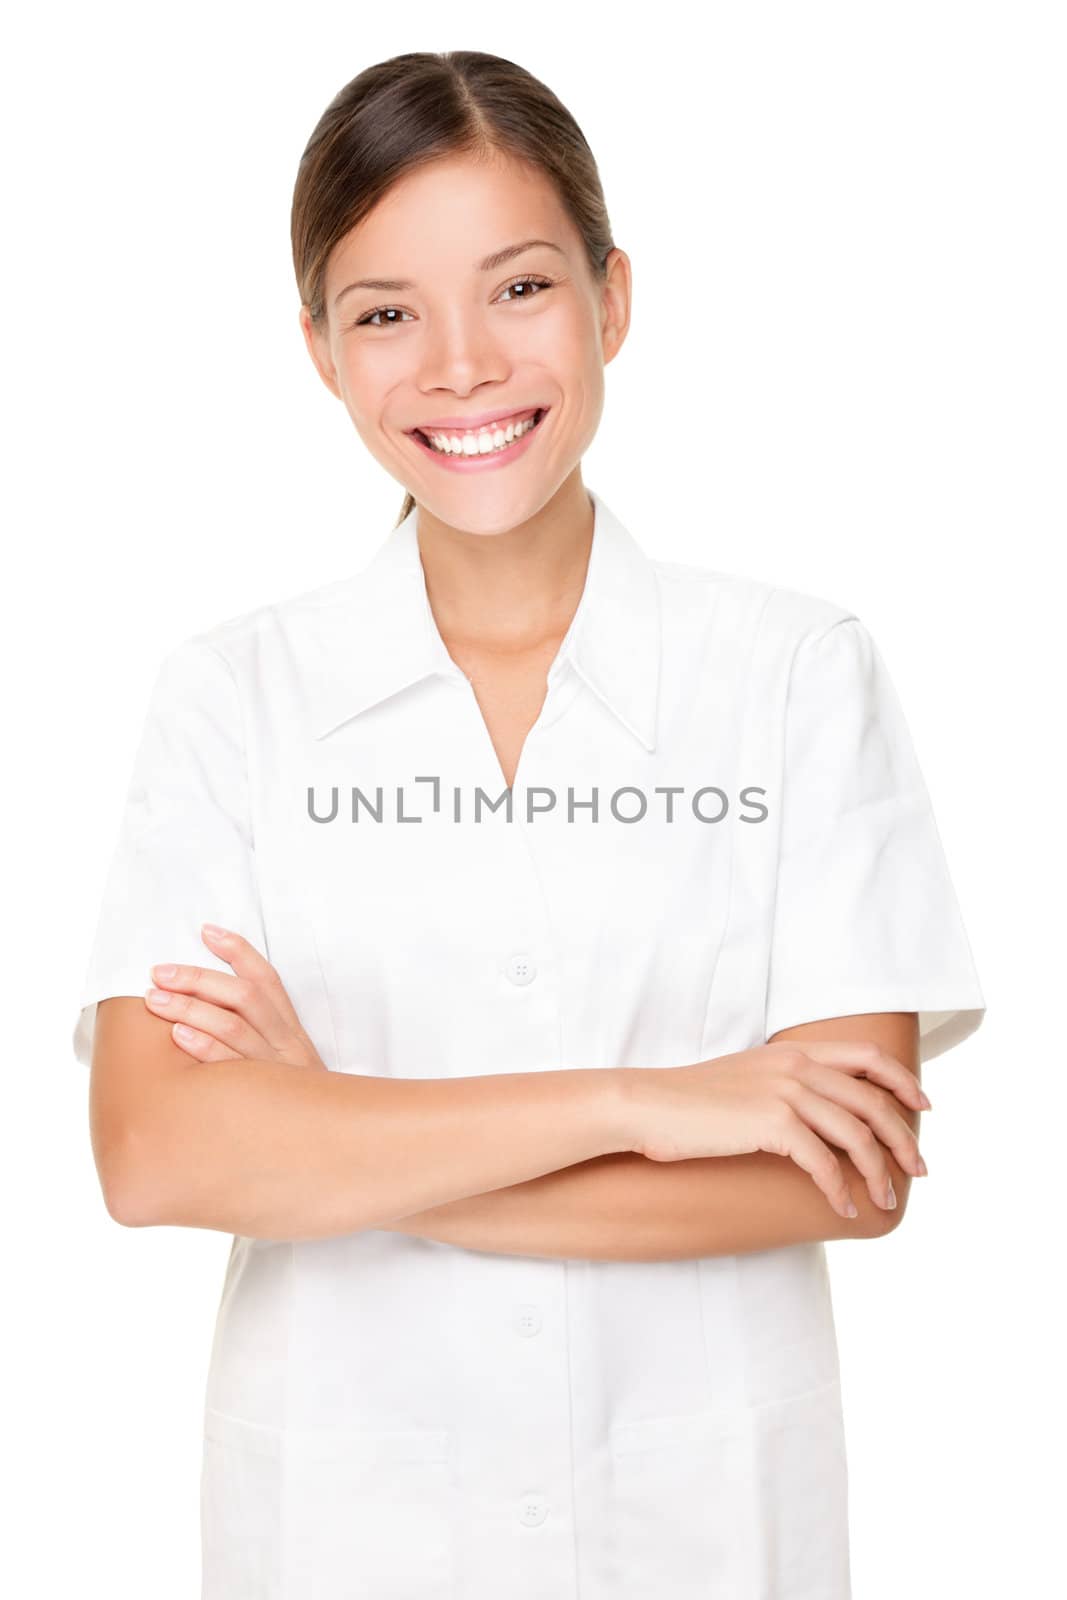 Beautician. Beauty spa massage therapist woman portrait isolated on white background. Mixed race Asian Caucasian model.